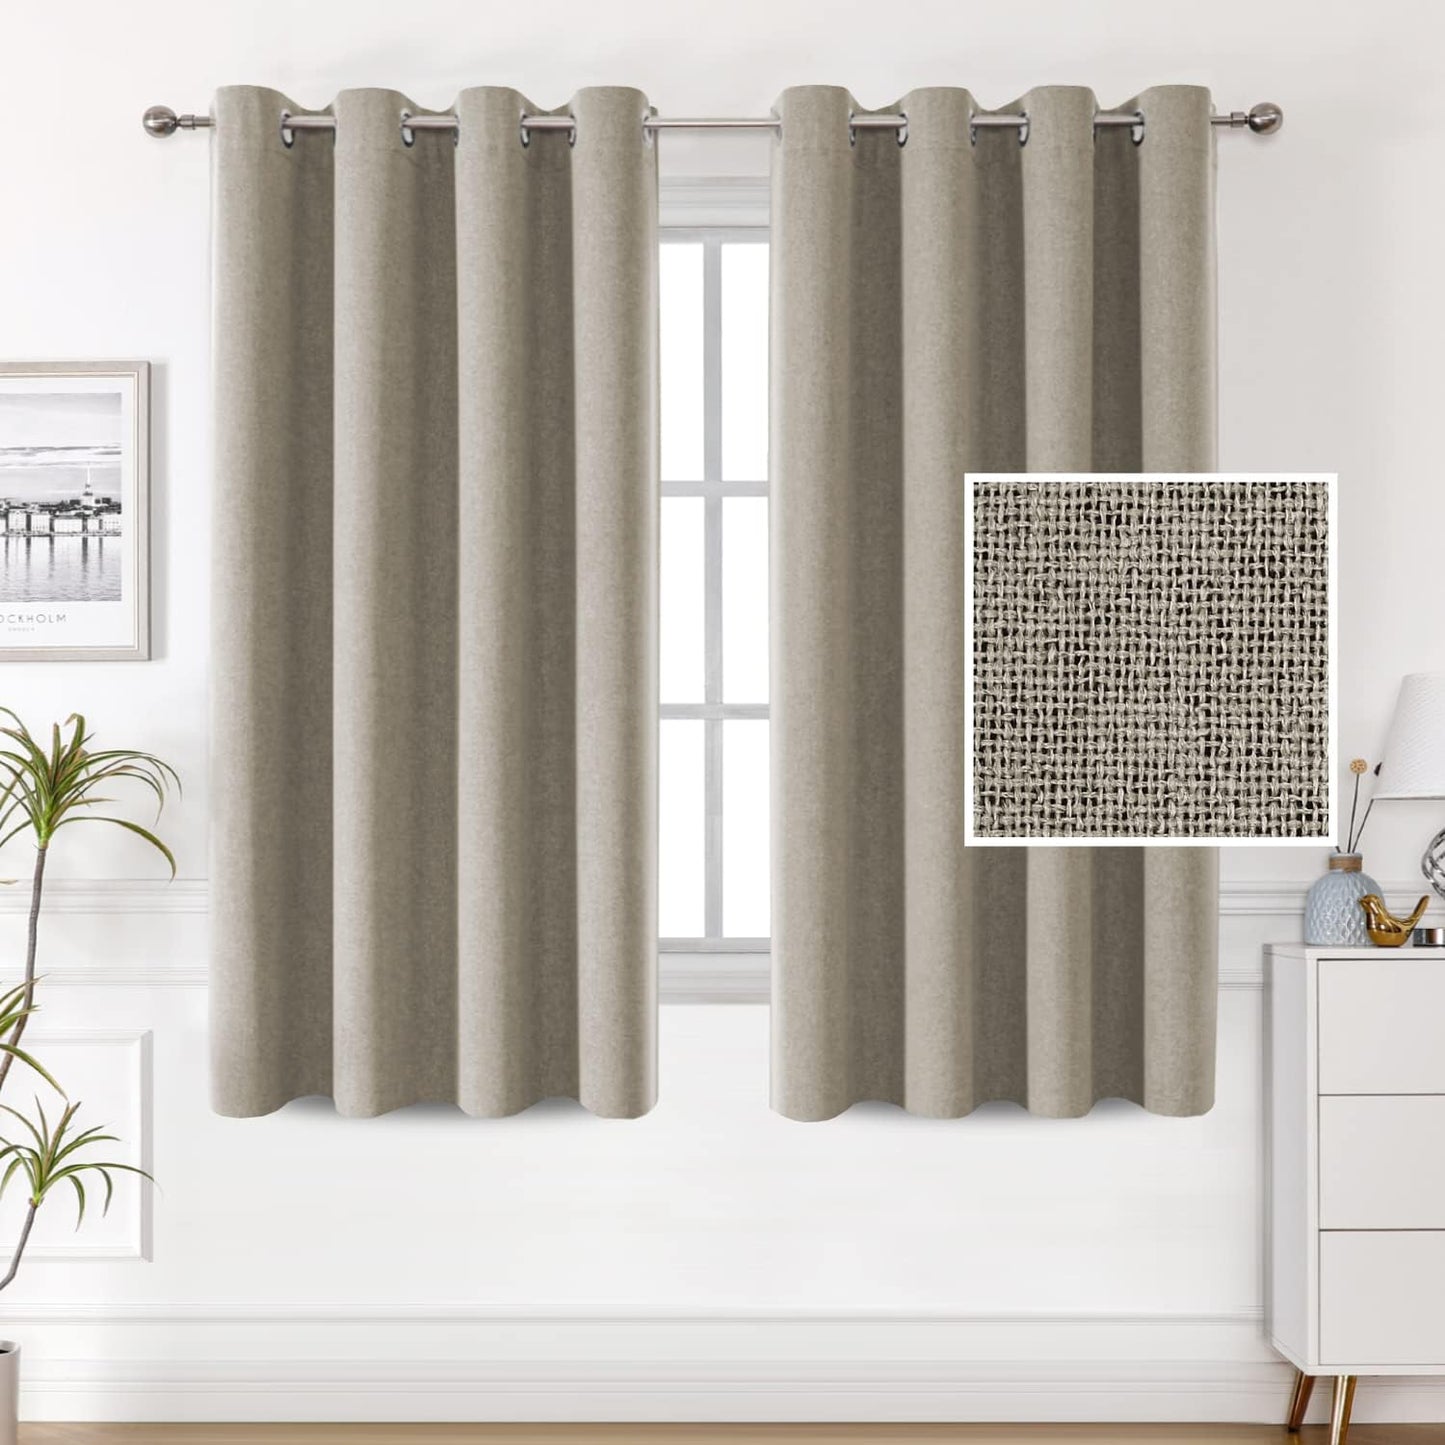 H.VERSAILTEX 100% Blackout Linen Look Curtains Thermal Insulated Curtains for Living Room Textured Burlap Drapes for Bedroom Grommet Linen Noise Blocking Curtains 42 X 84 Inch, 2 Panels - Sage  H.VERSAILTEX Taupe 52"W X 54"L 